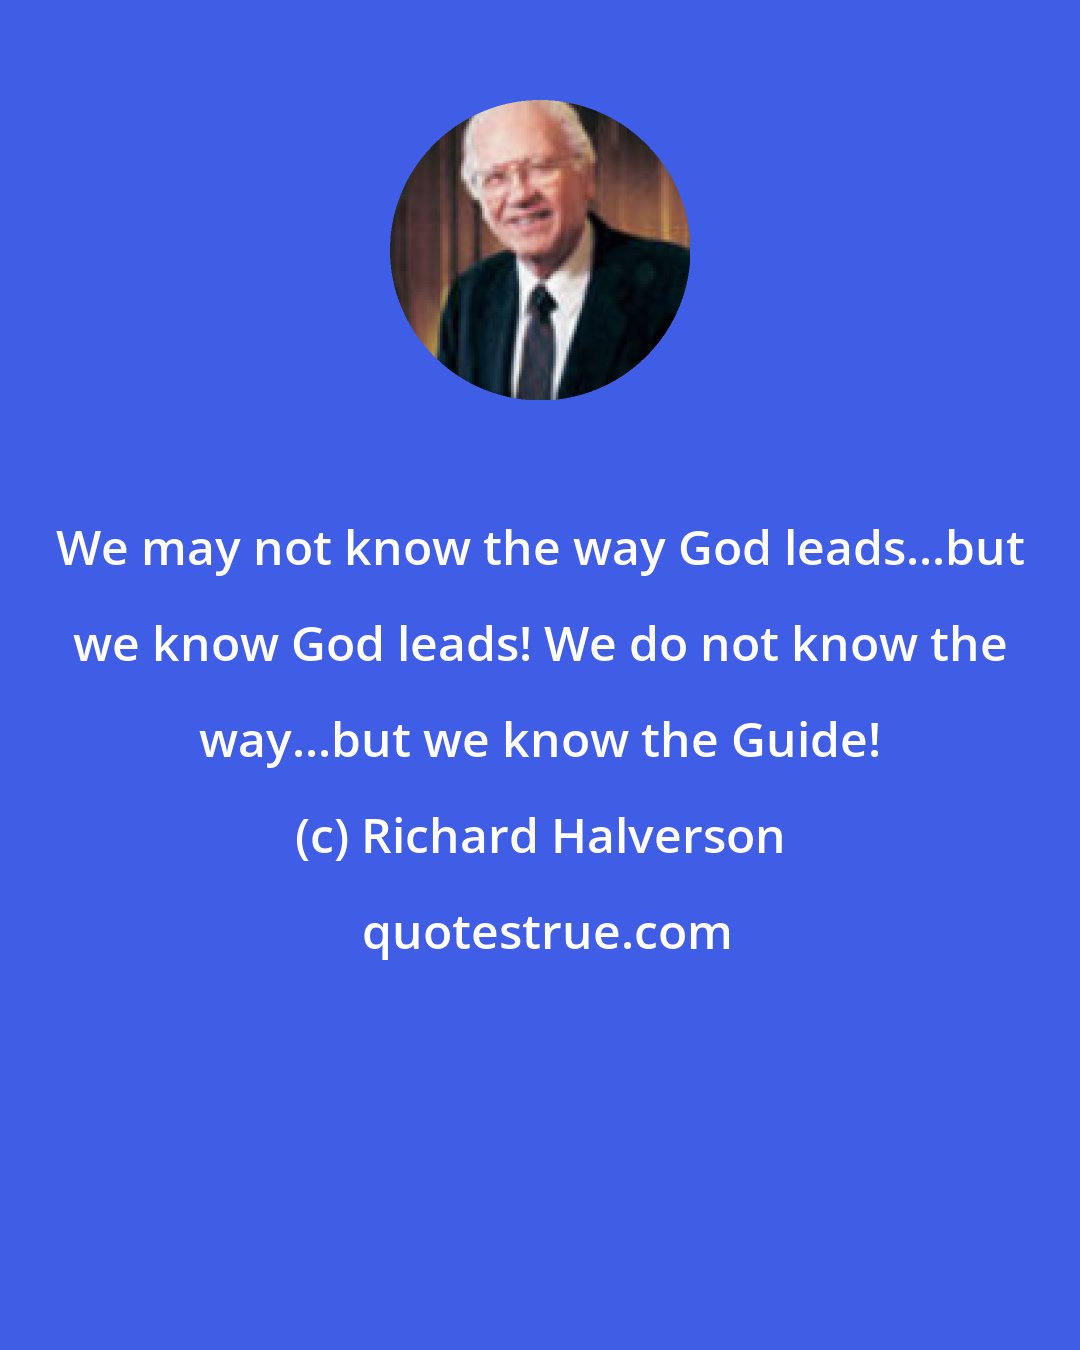 Richard Halverson: We may not know the way God leads...but we know God leads! We do not know the way...but we know the Guide!